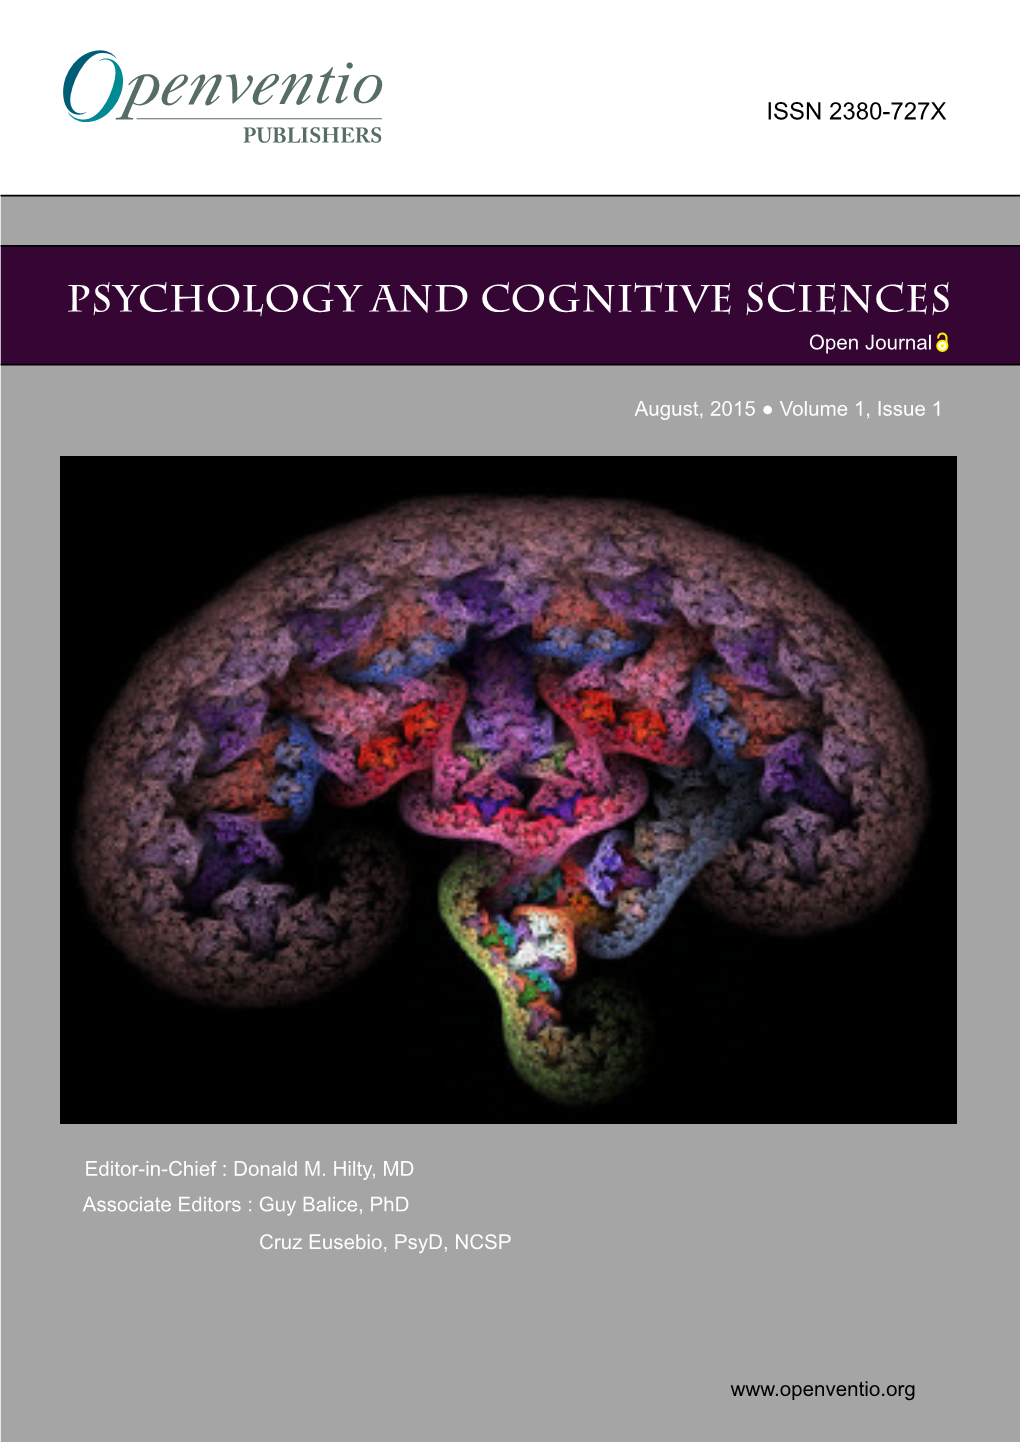 Psychology and Cognitive Sciences Open Journal